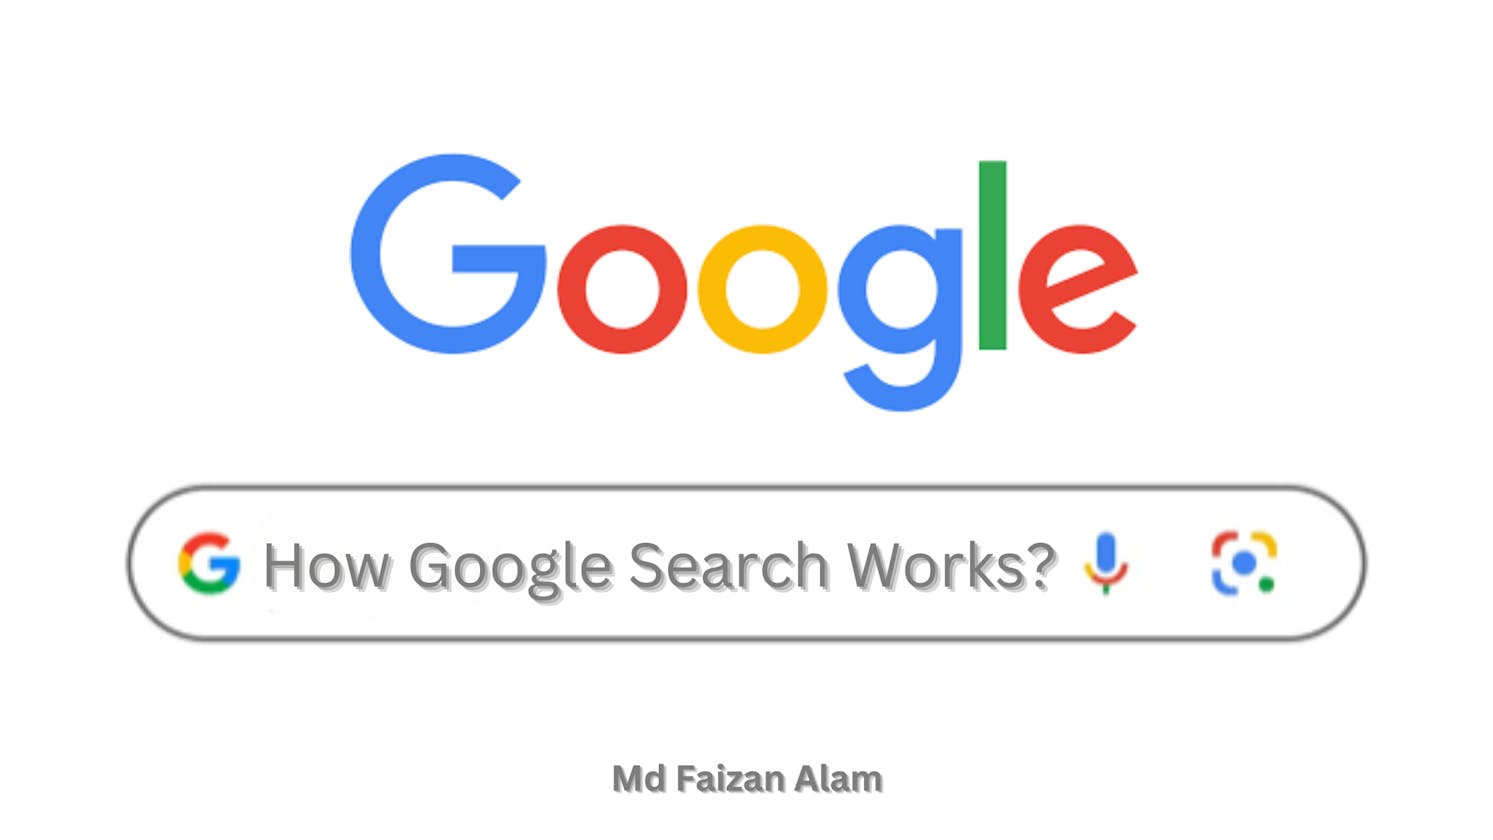 How Google Search Works?